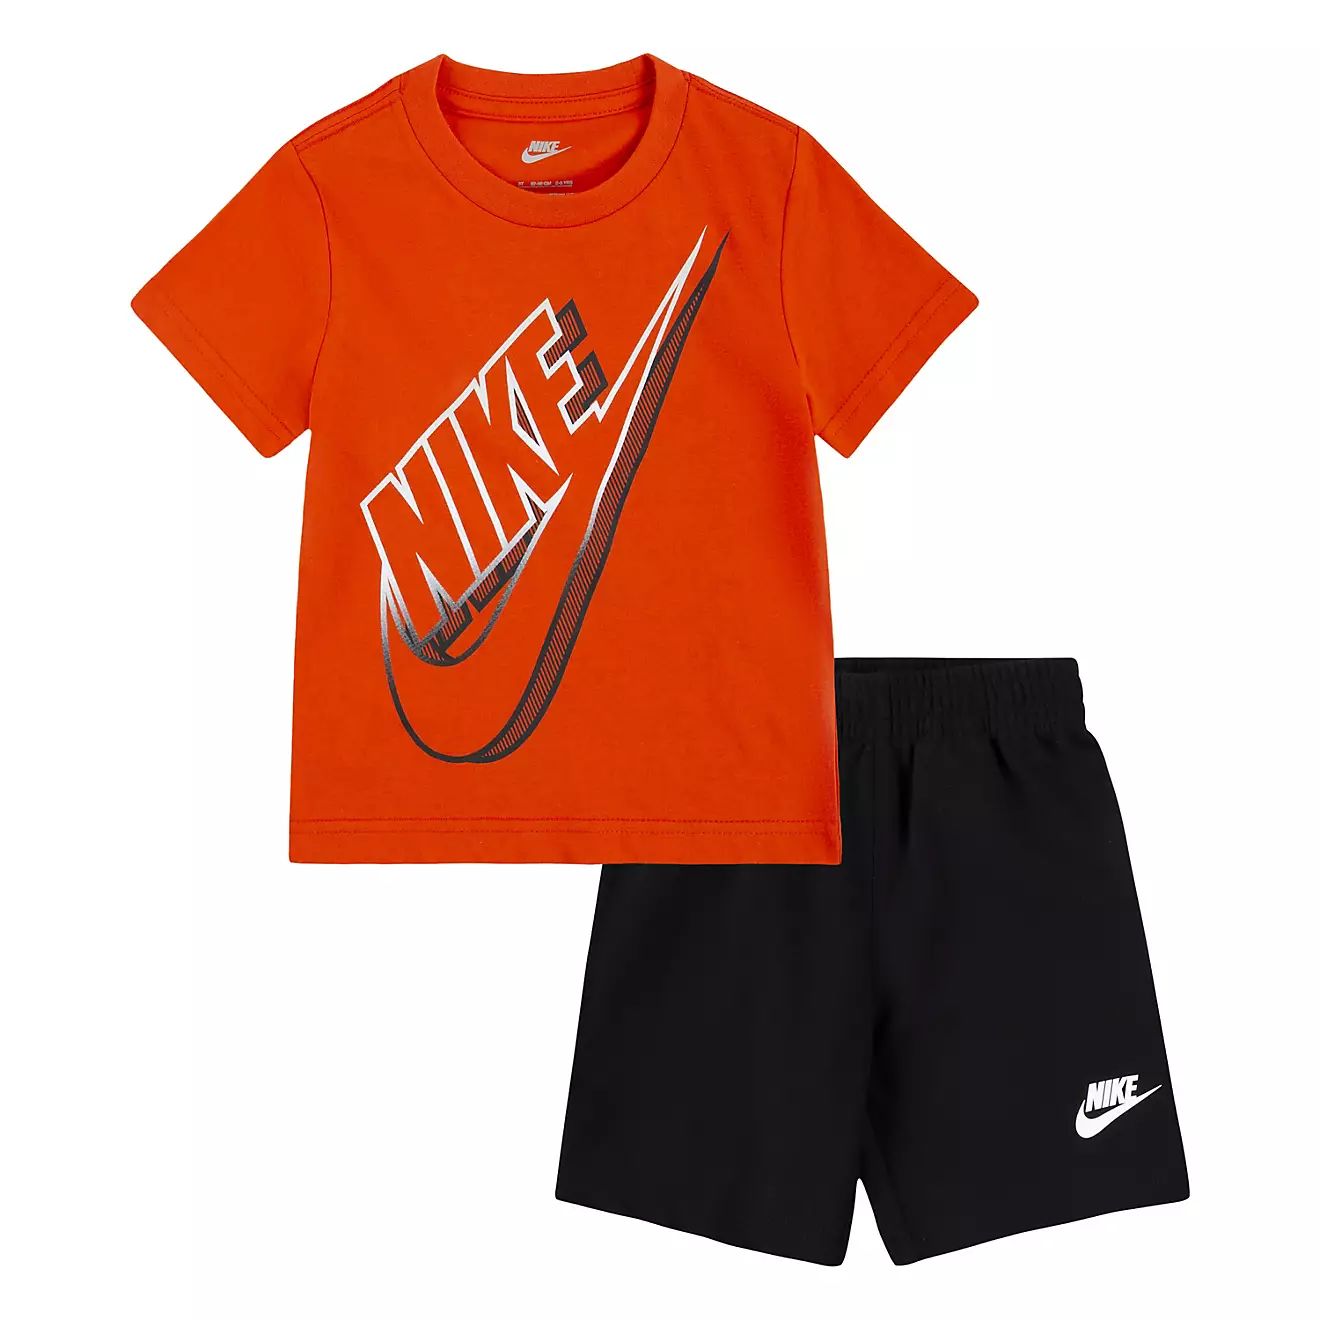 Nike Toddler Boys’ Sportswear Jersey T-shirt and Shorts Set | Academy Sports + Outdoors